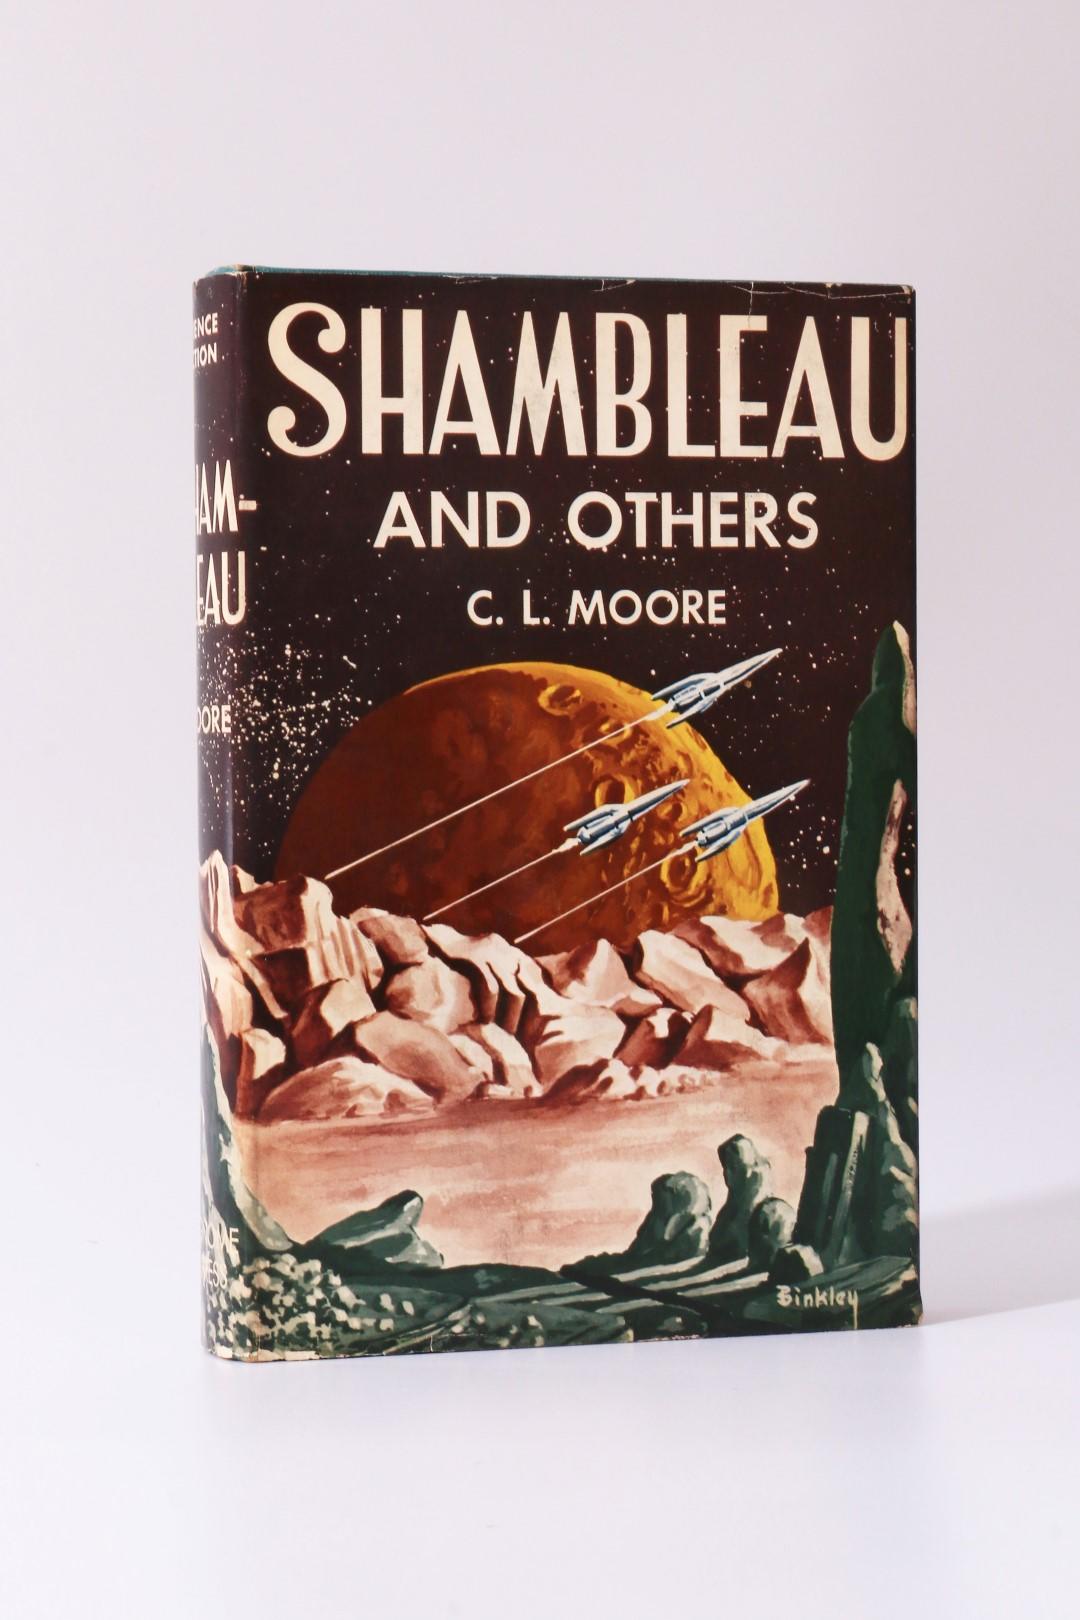 C.L. Moore - Shambleau and Others - Gnome Press, 1953, First Edition.